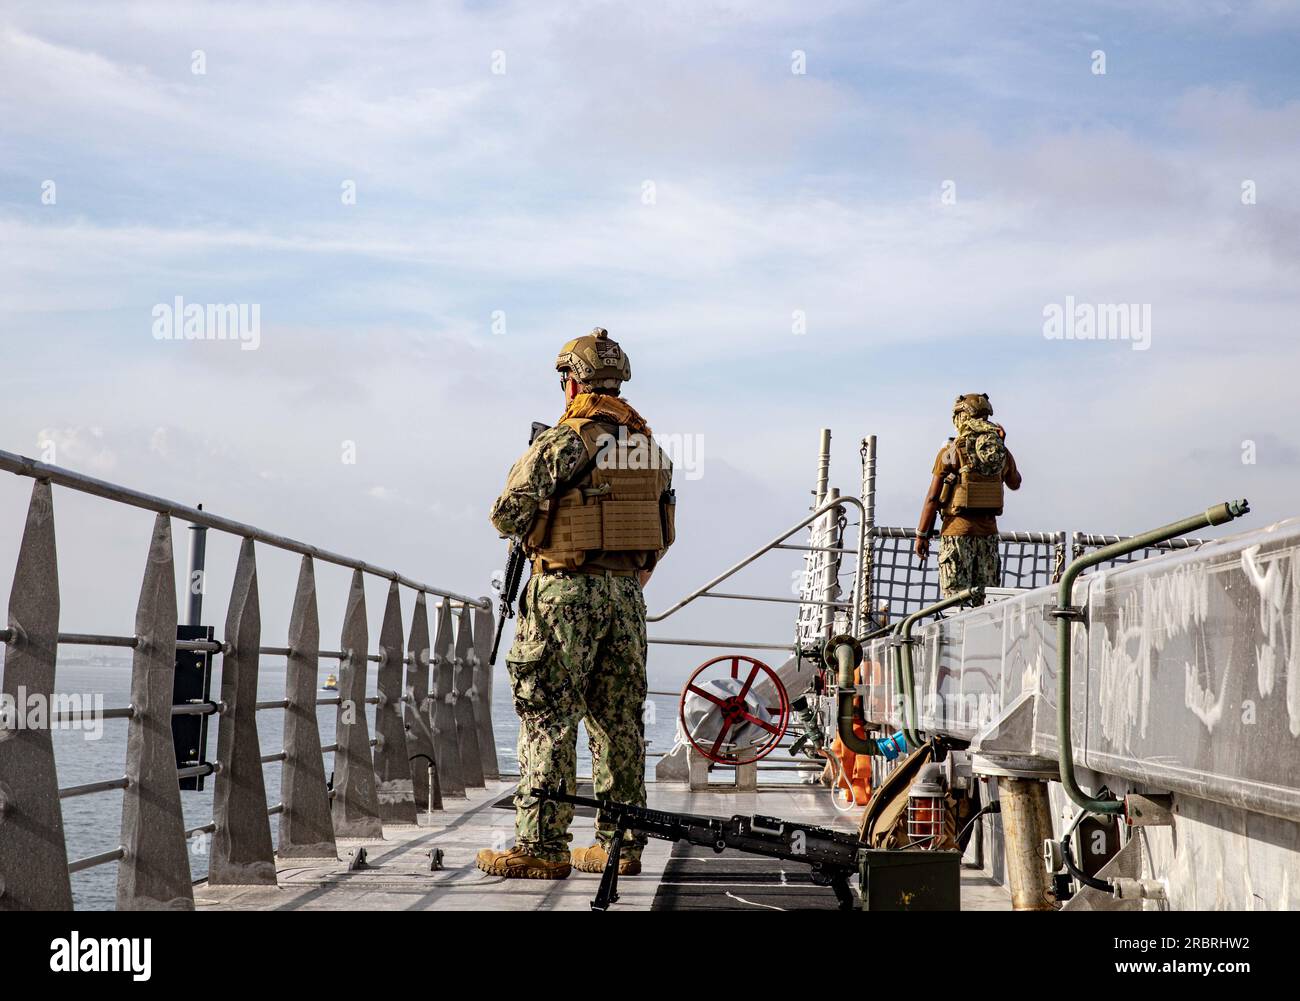 20230701-N-EA686-1011  CARTAGENA, Colombia (July 1, 2023) Master-at-Arms 2nd Class Michael Turner, assigned to the expeditionary fast transport USNS Burlington (T-EFP 10), stands security forces watch as the ship arrives in Cartagena, Colombia in preparation for UNITAS LXIV, July 1, 2023. Burlington is one of 26 vessels slated to participate in UNITAS LXIV, the world’s longest running maritime exercise, July 11-21. Colombia is hosting UNITAS LXIV this year with nearly 7,000 people from 20 nations. (U.S. Navy photo by Lt.j.g. Nicko West/Released) Stock Photo